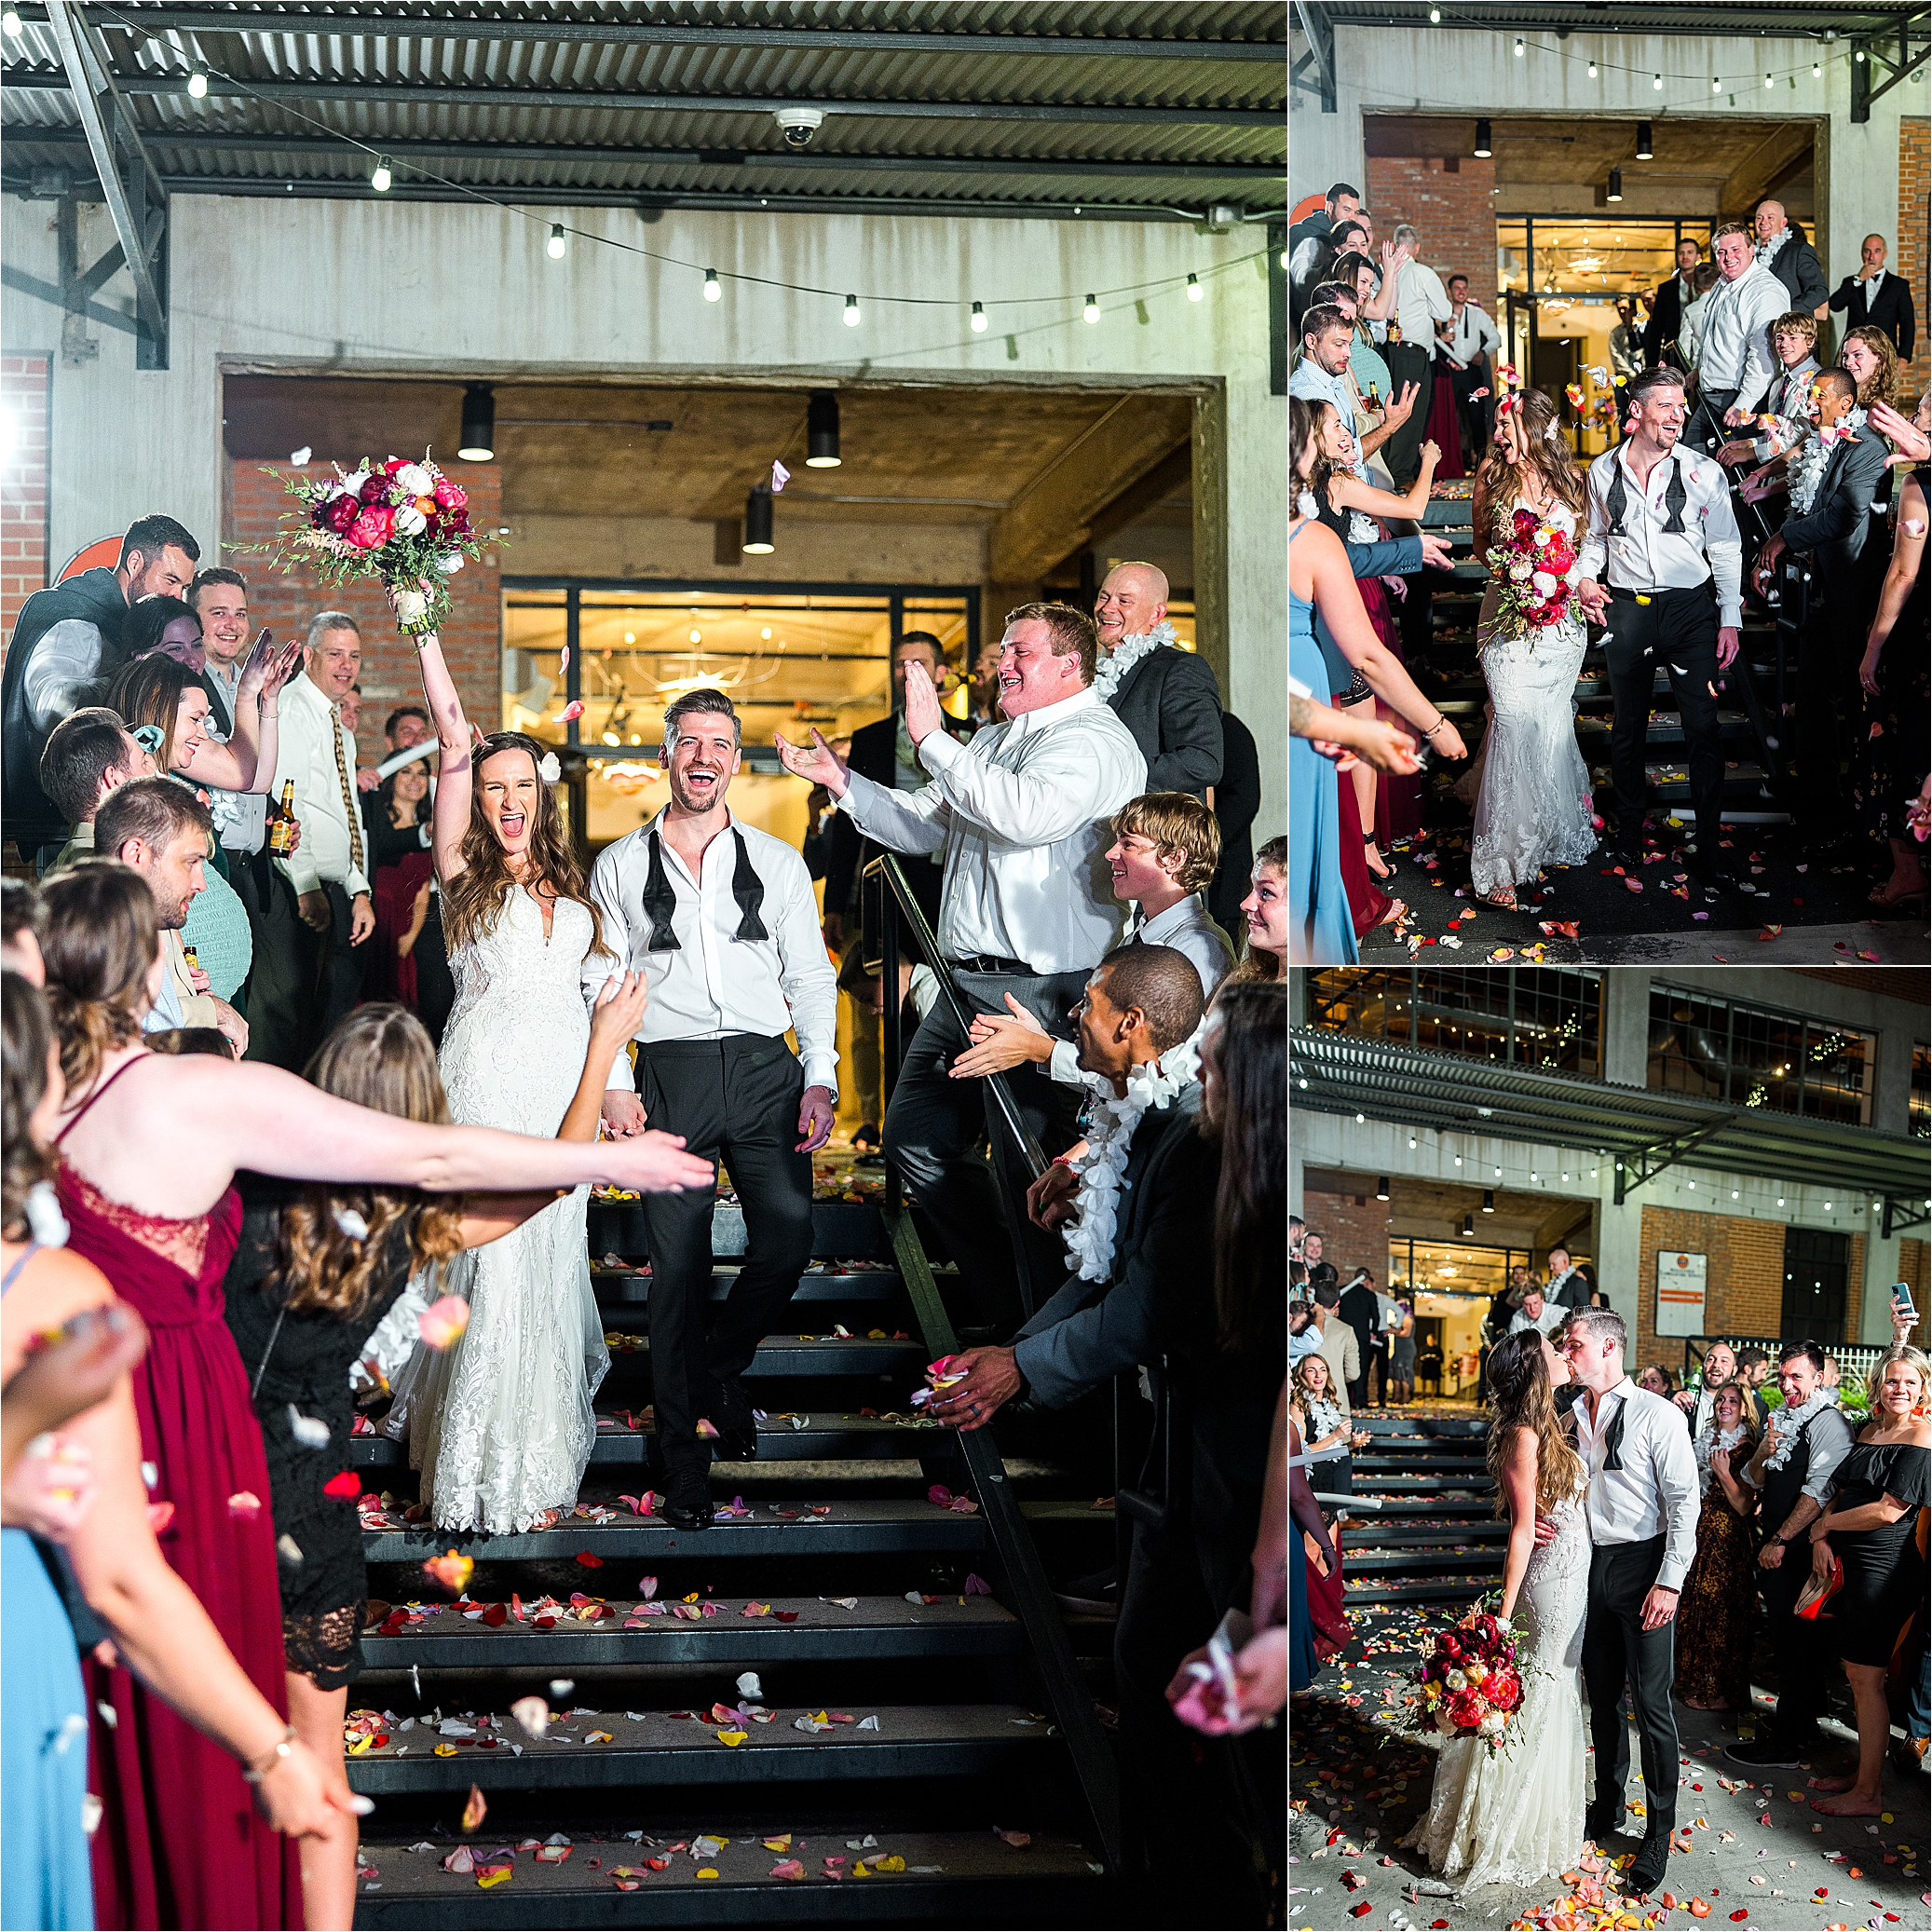 A newlywed joyfully cheers as they exit their reception venue and their guests toss rose petals to celebrate at Hickory Street Annex 